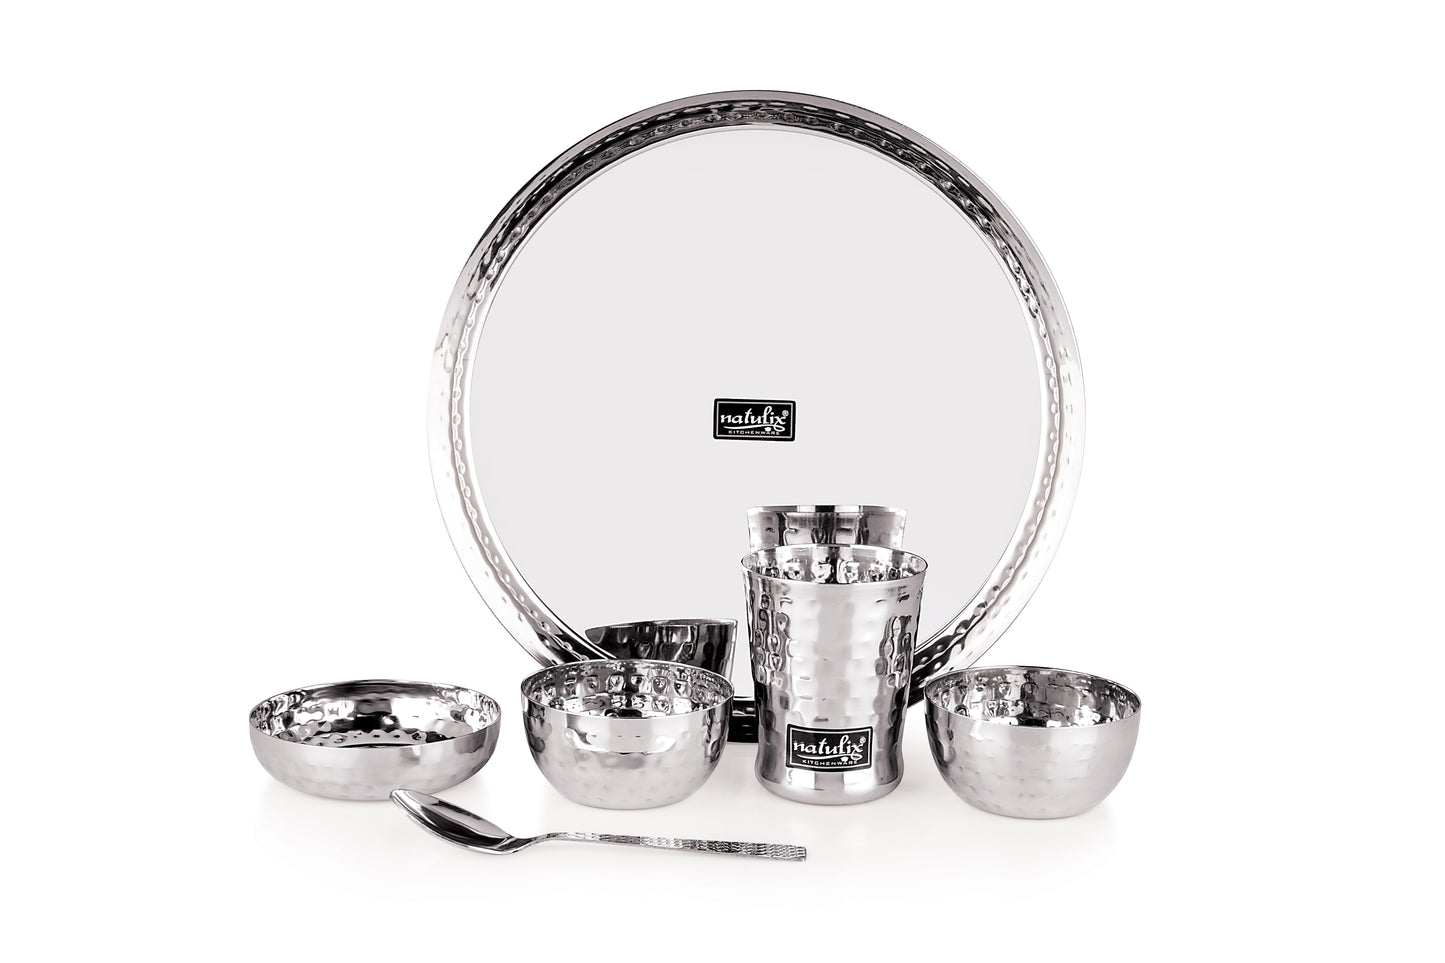 NATULIX Royal Stainless Steel Hammered Finish Dinner Set of 6 Pcs ( 1 Thali, 2 Bowl, 1 Sweet Plate, 1 Spoon & 1 Glass)